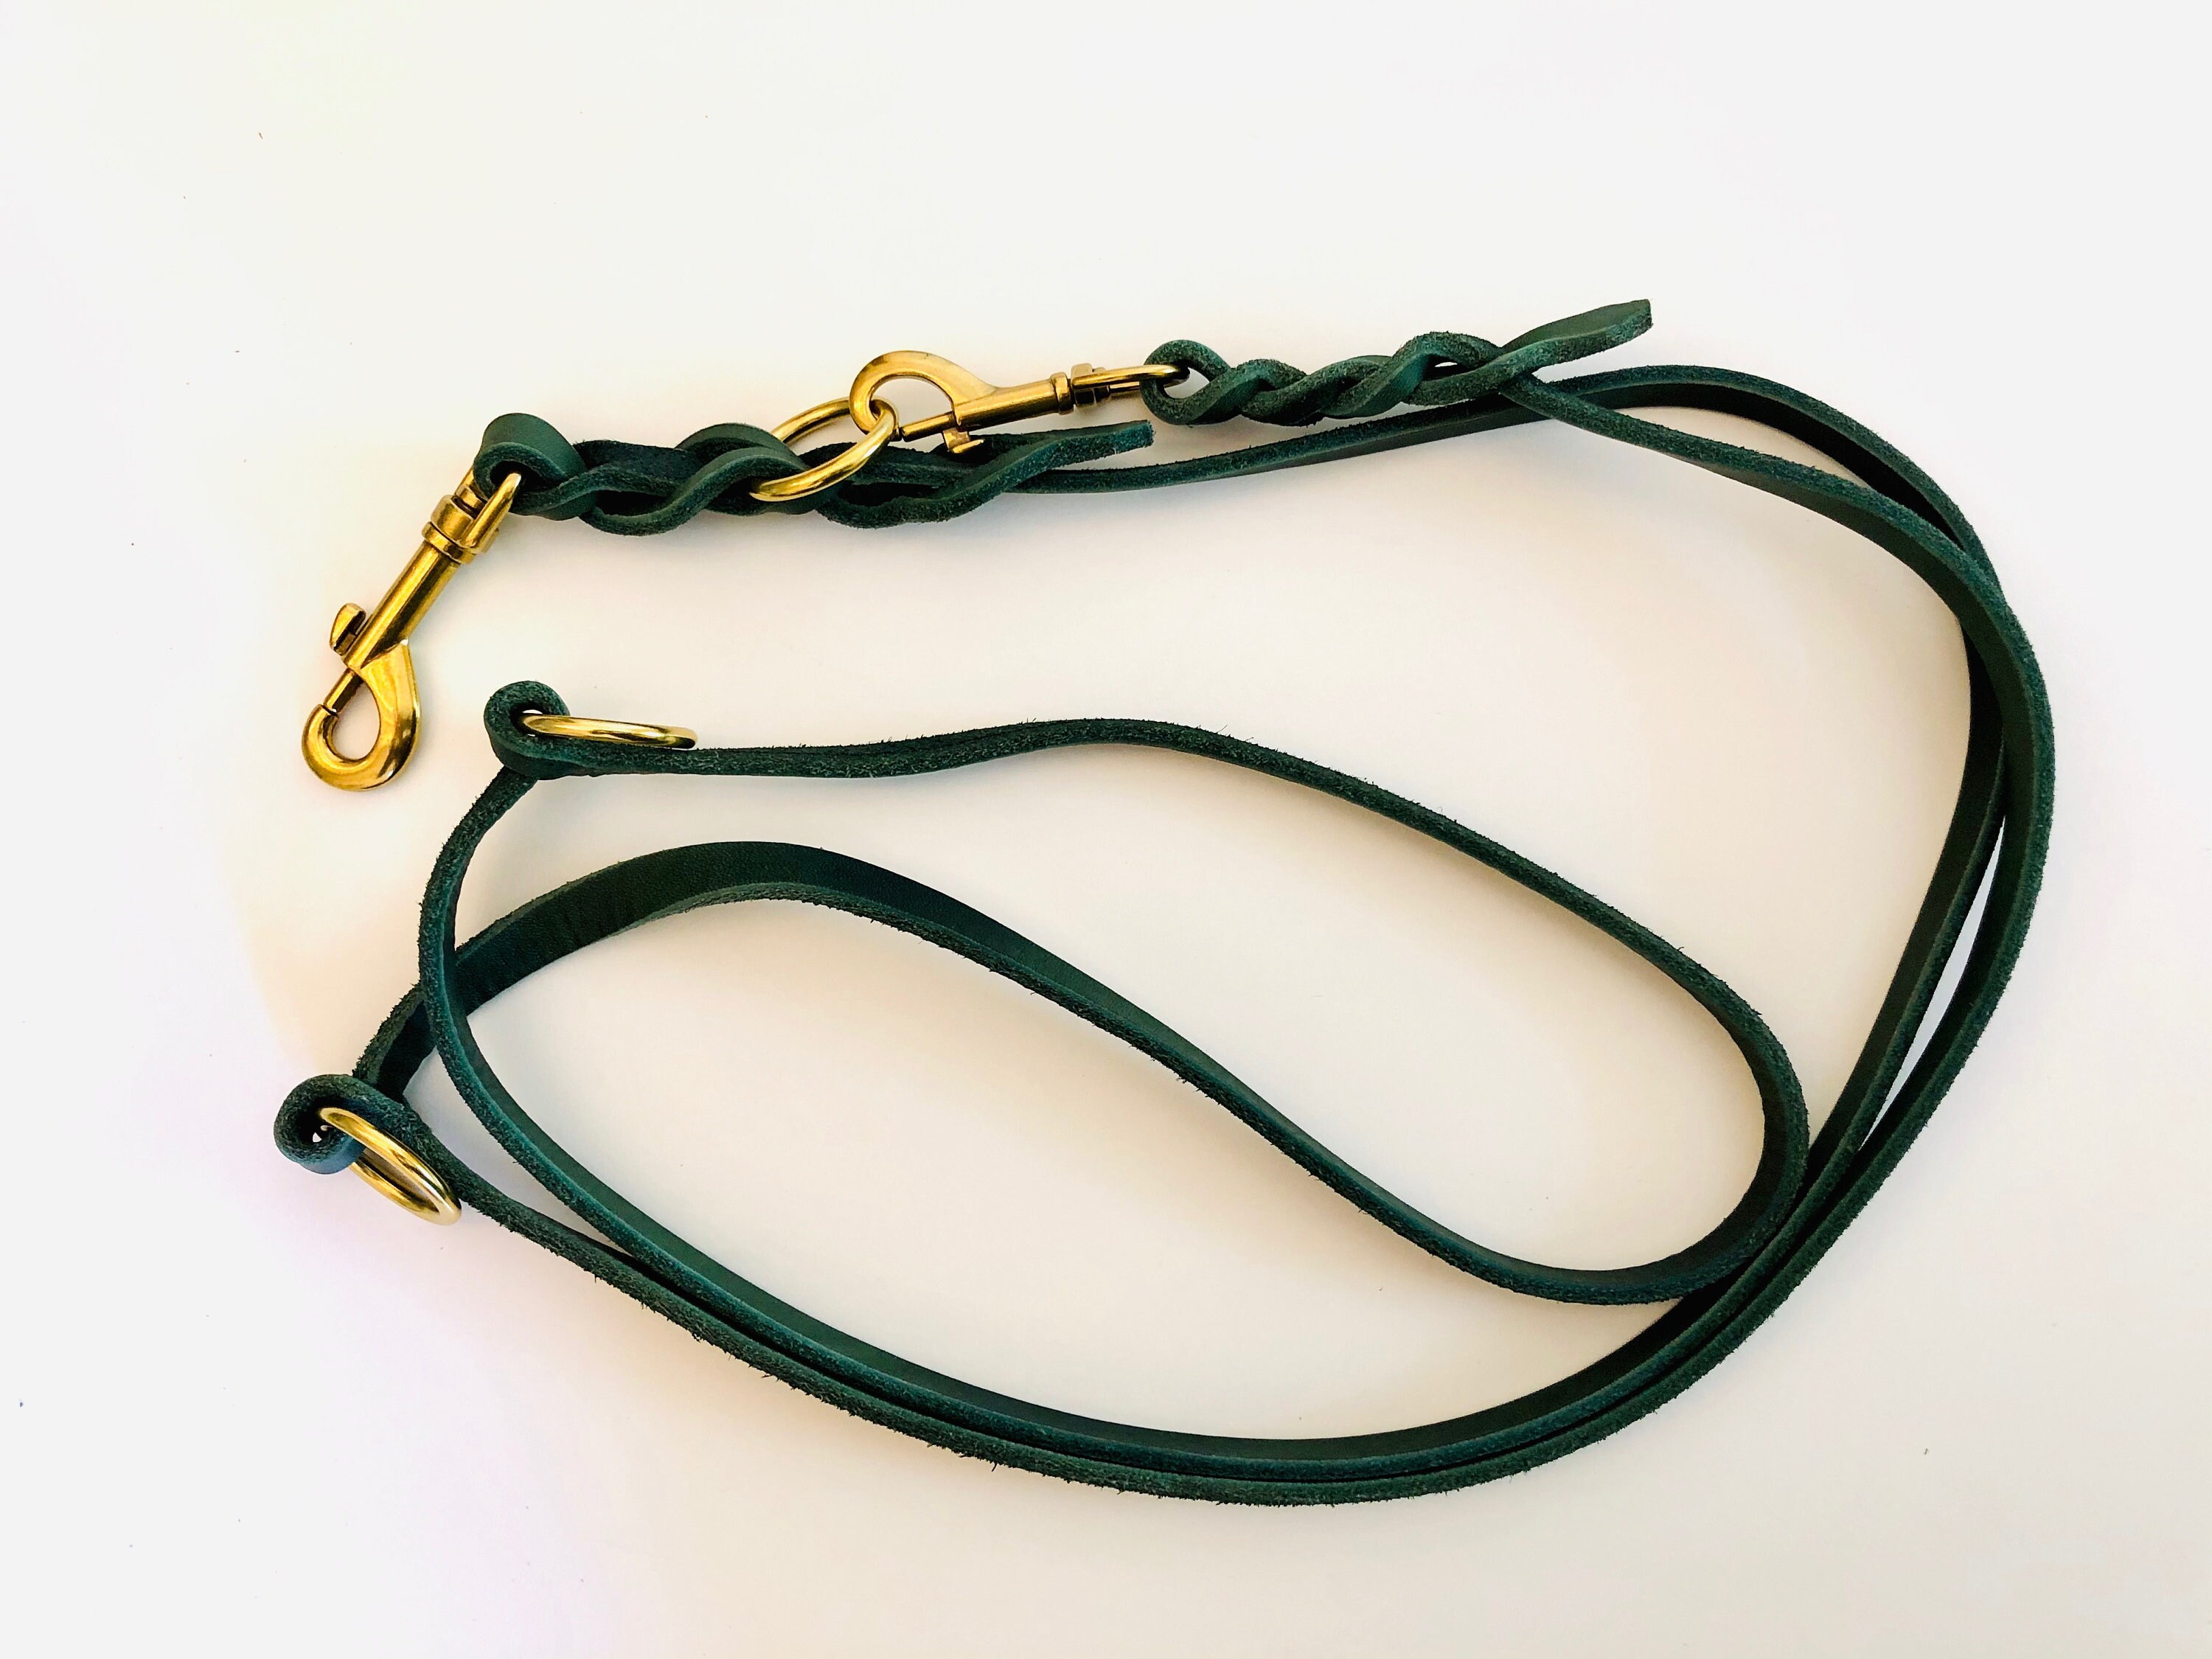 MANHATTAN 3-way adjustable leash made of grease leather approx 2 meters